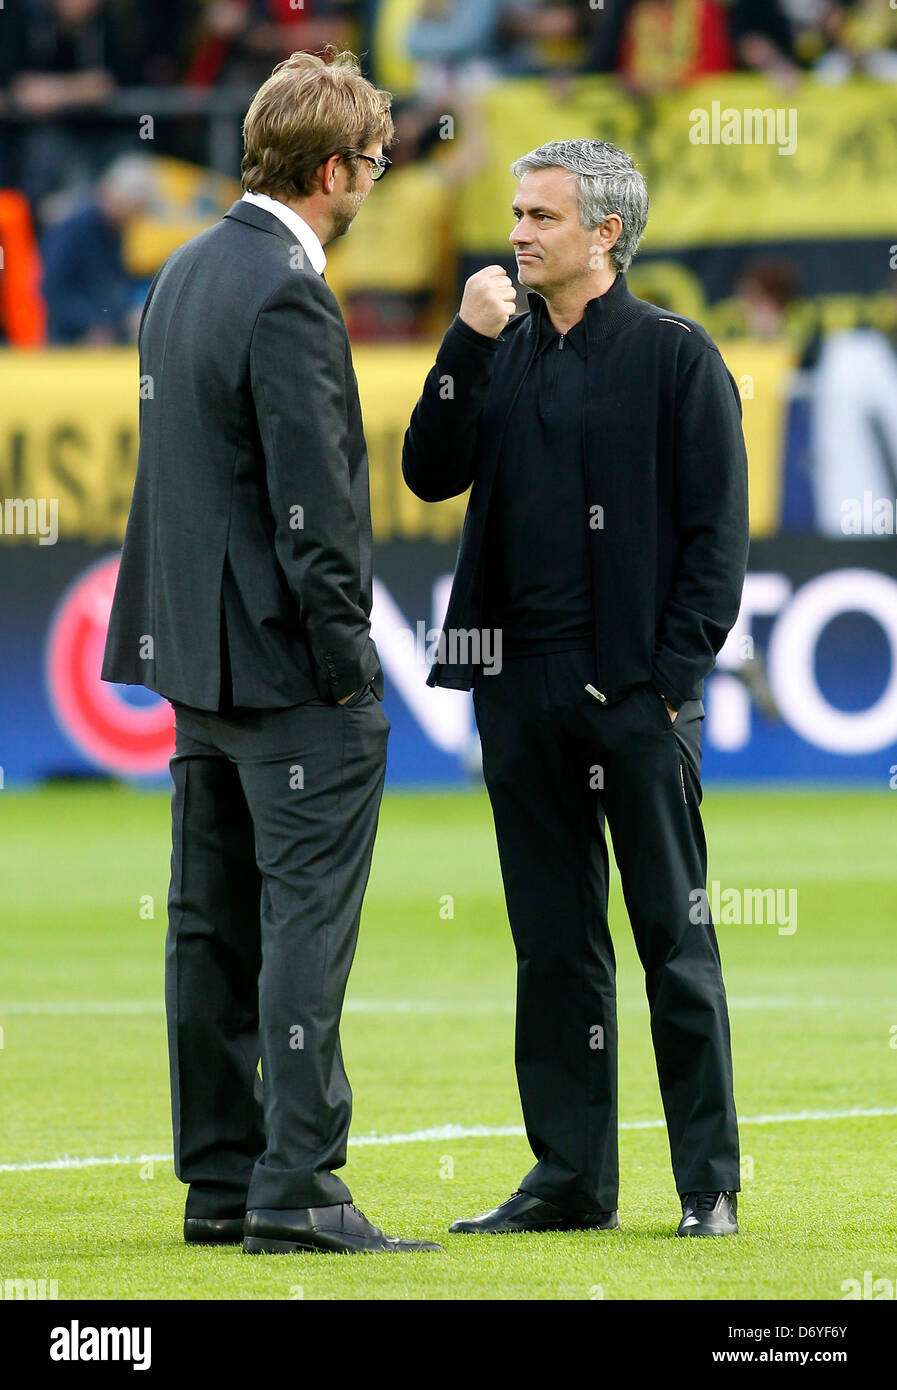 Dortmund Germany 24th April 13 Dortmund S Coach Juergen Klopp L And Madrid S Coach Jose Mourinho In Discussion Prior The Champions League Semi Final Match Between Borussia Dortmund And Real Madrid Signal Iduna Park